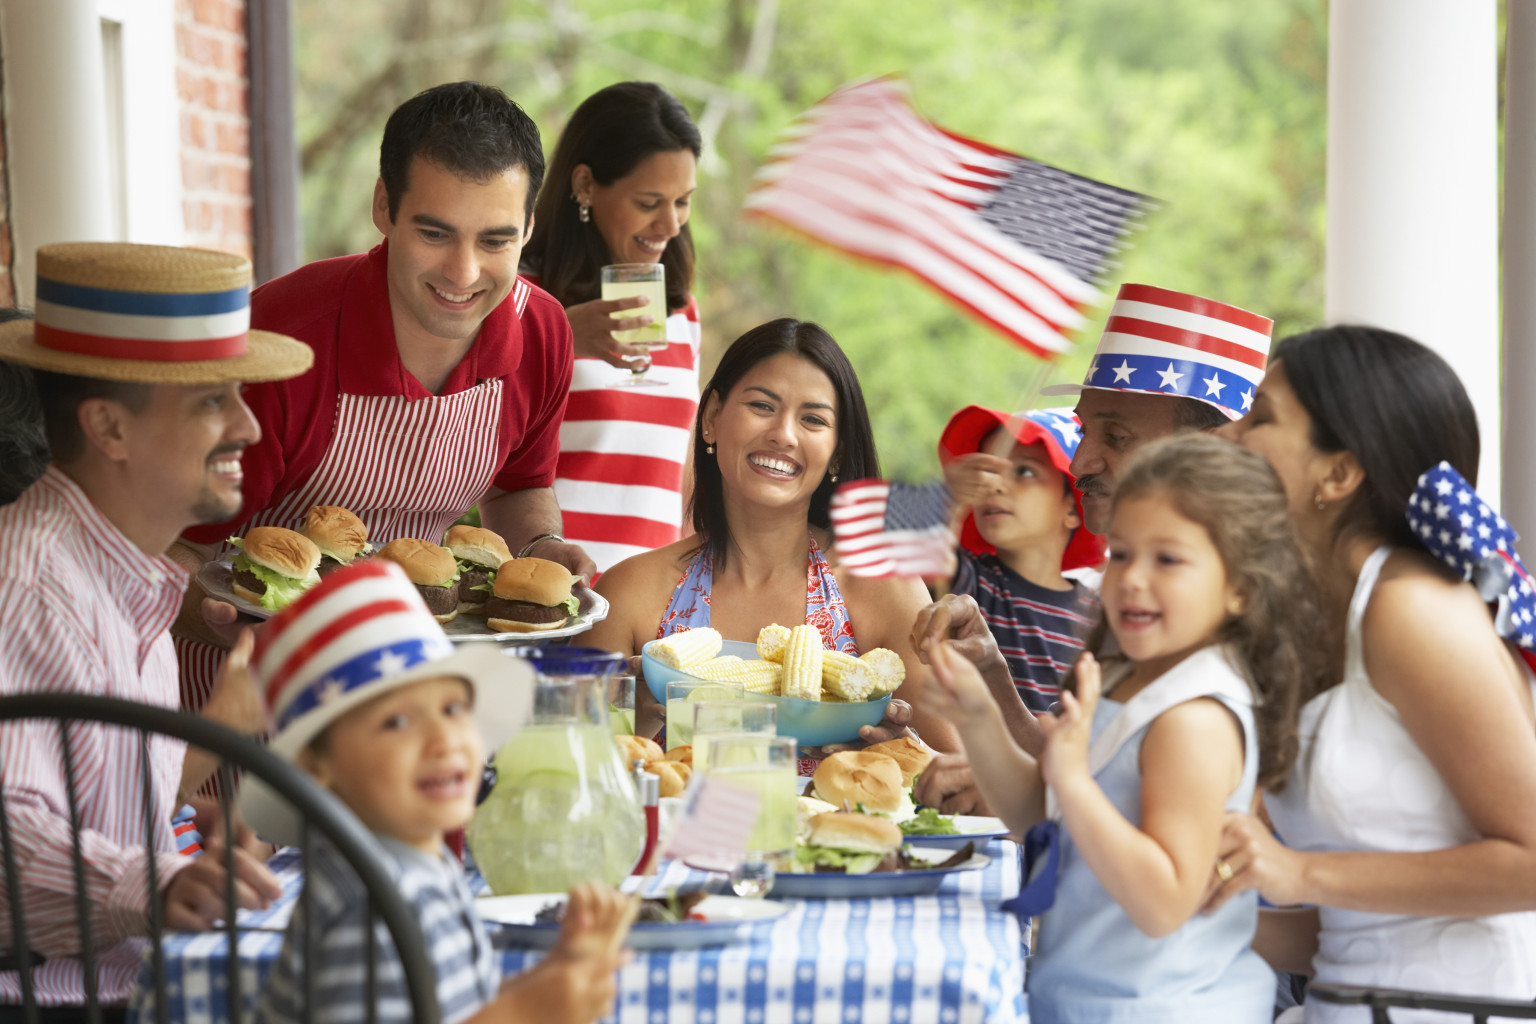 99 Ways To Make This Your Best Fourth Of July Ever! | HuffPost